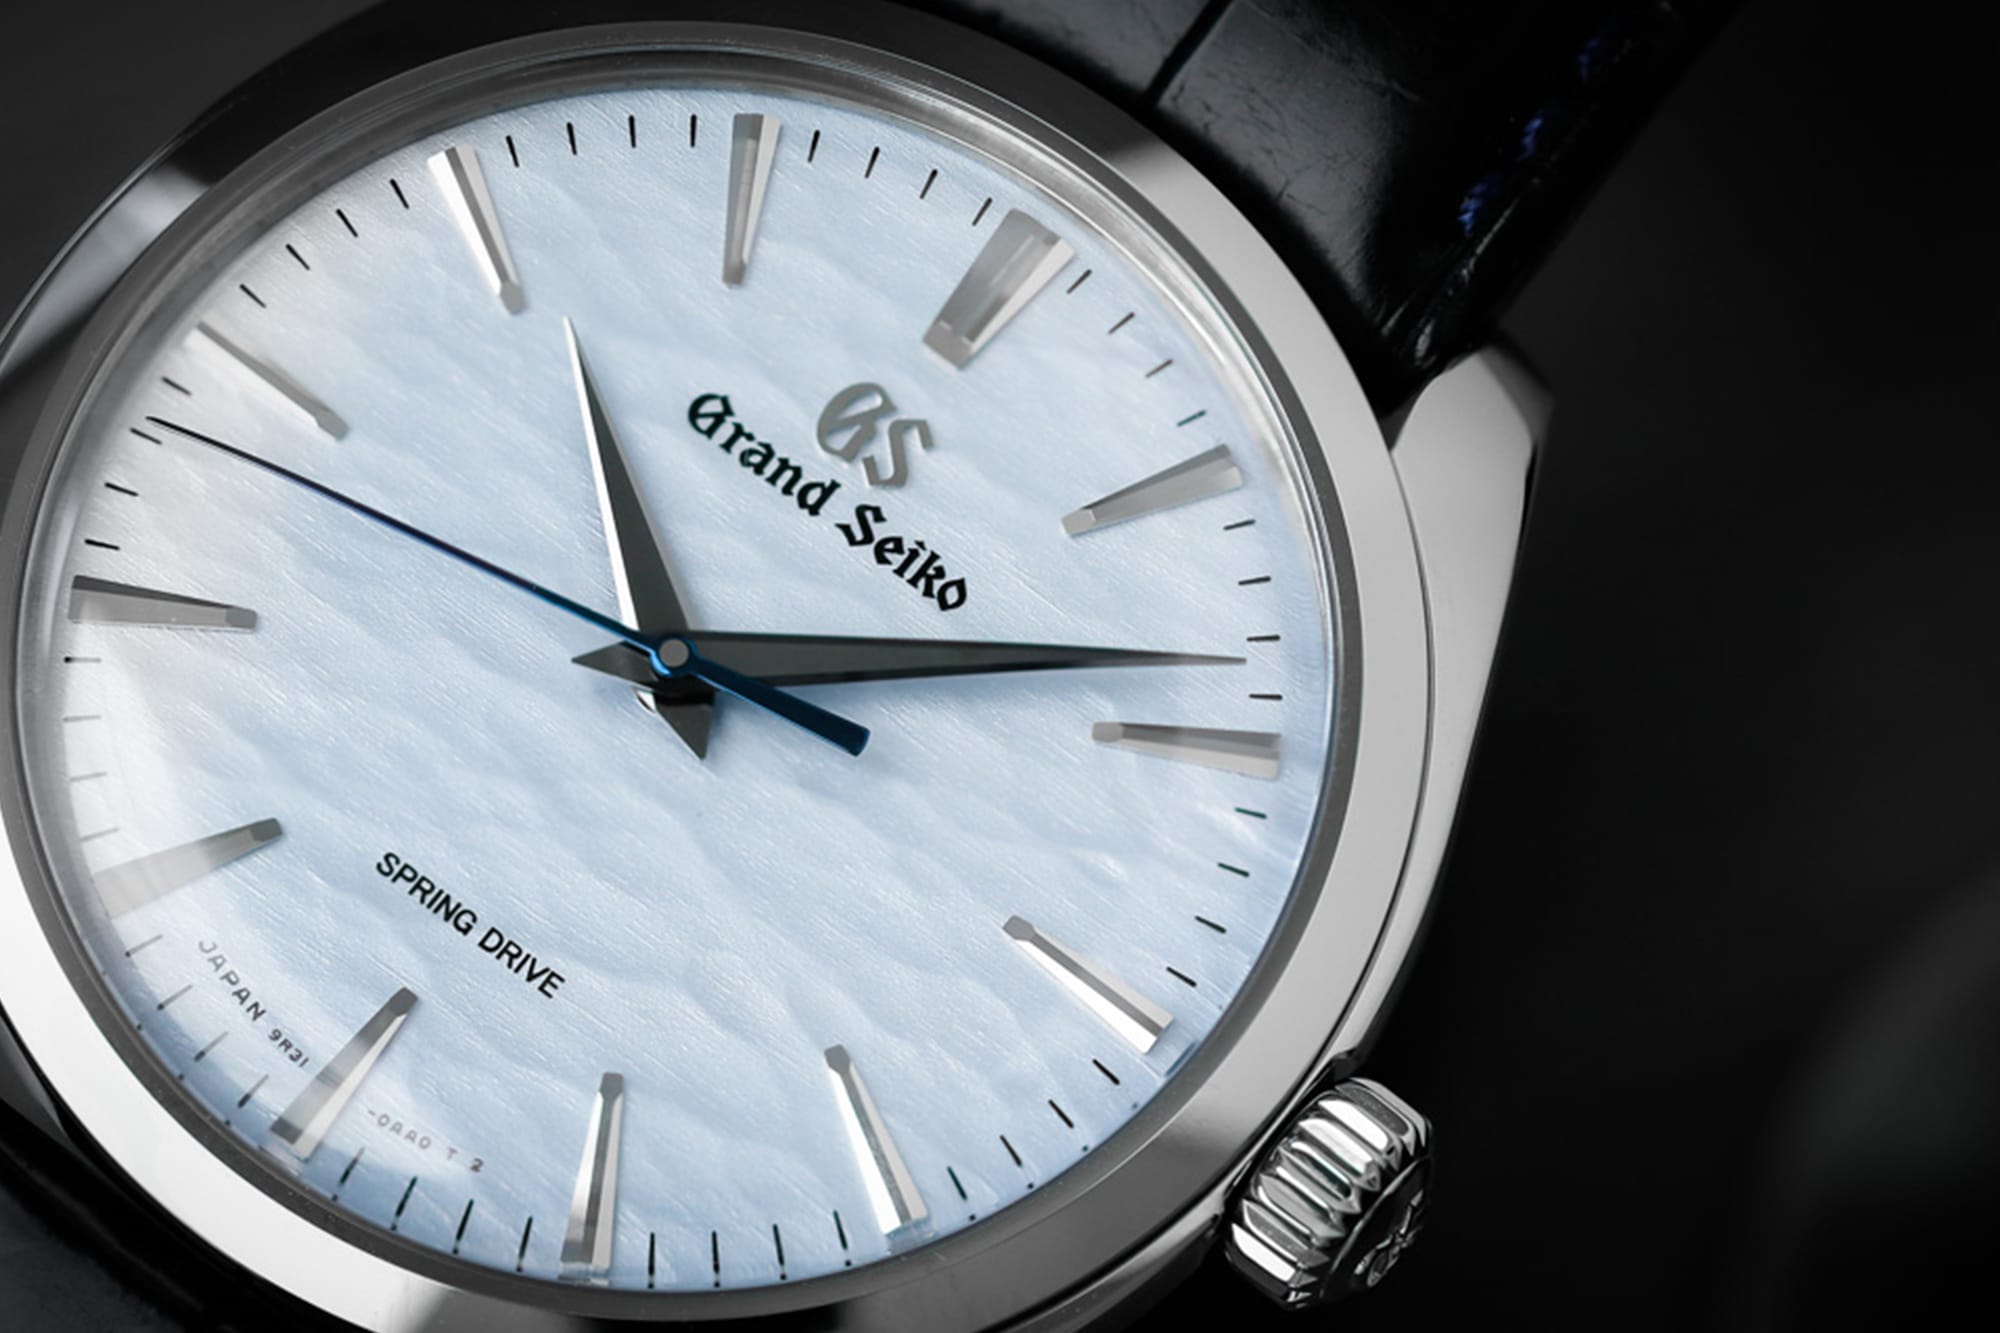 Grand Seiko Spring Drive Hand-wind Stainless  Ref#SBGY007 – HT llc